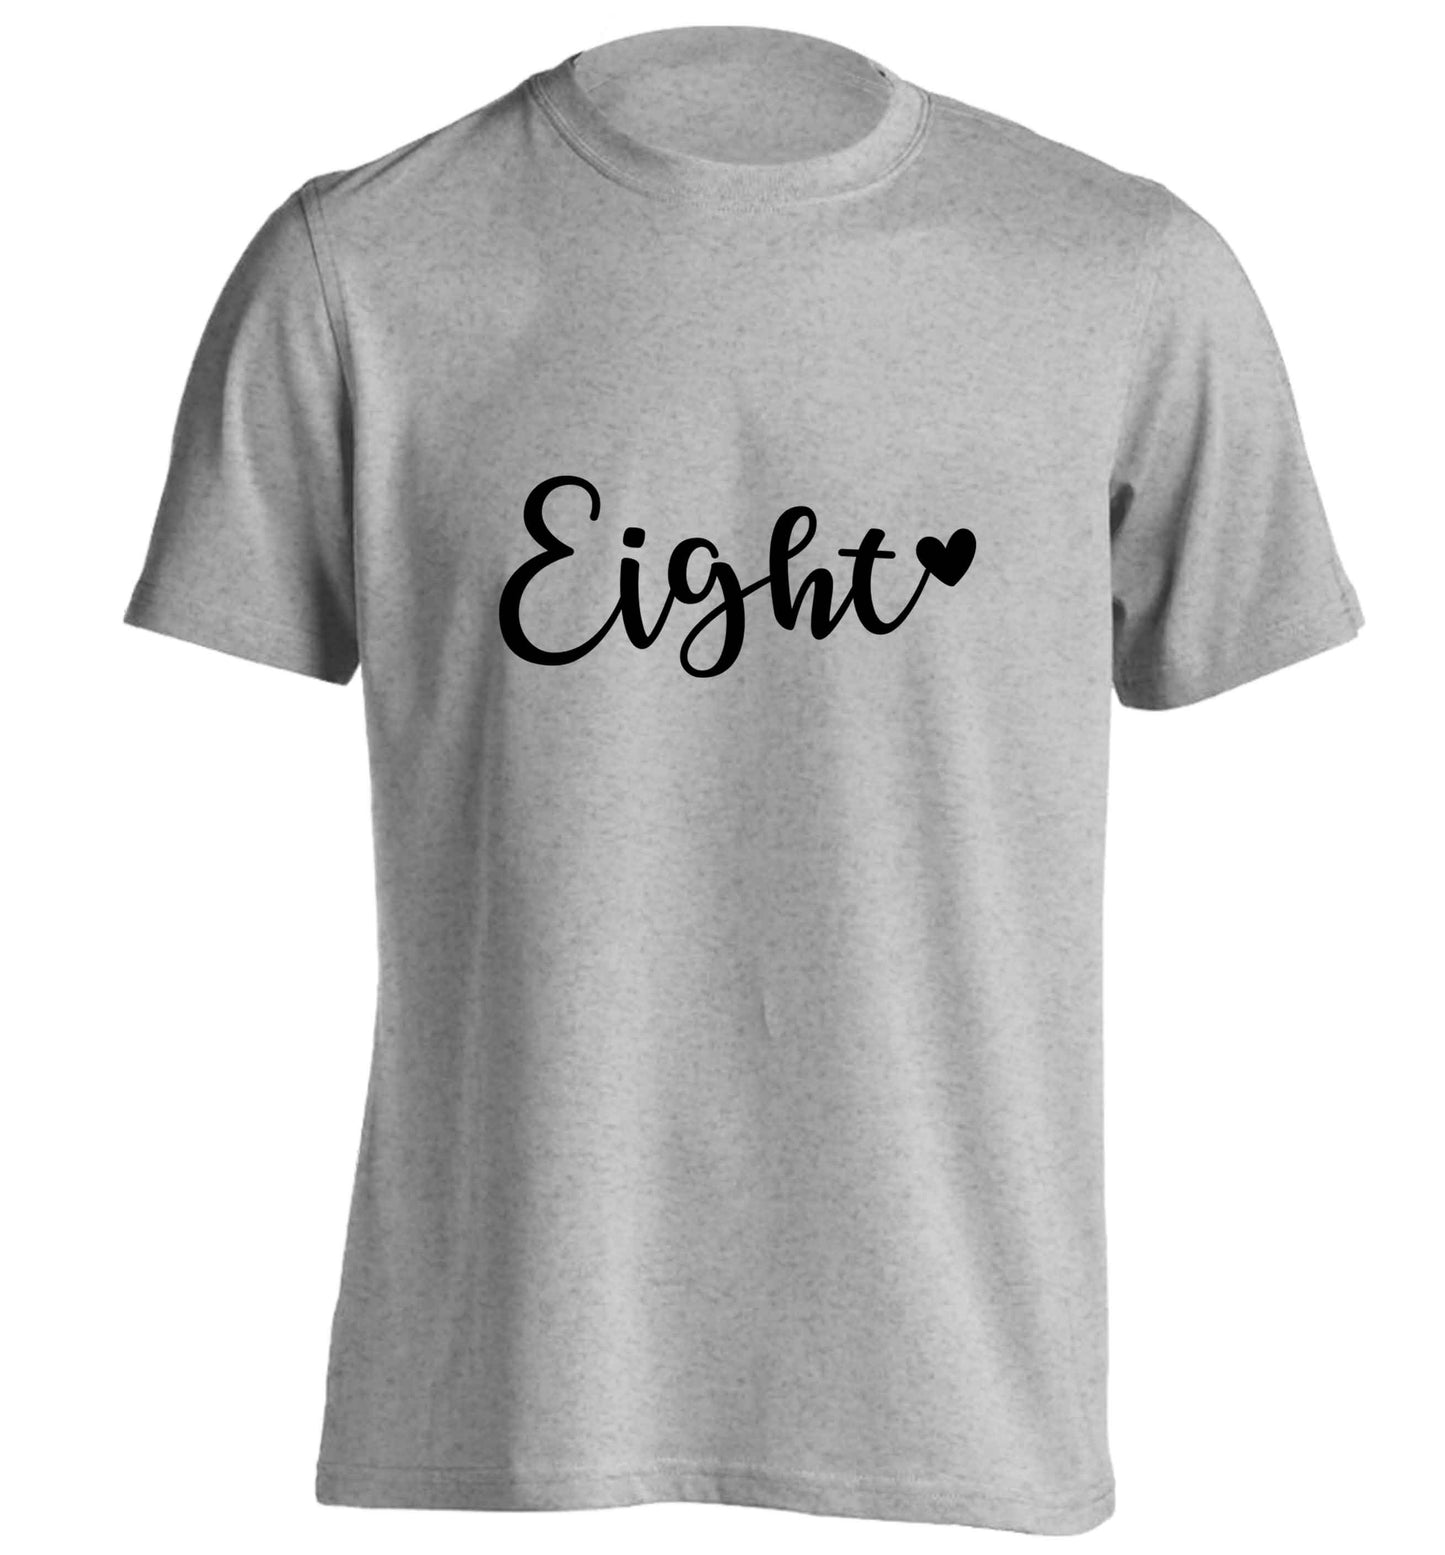 Eight and heart adults unisex grey Tshirt 2XL